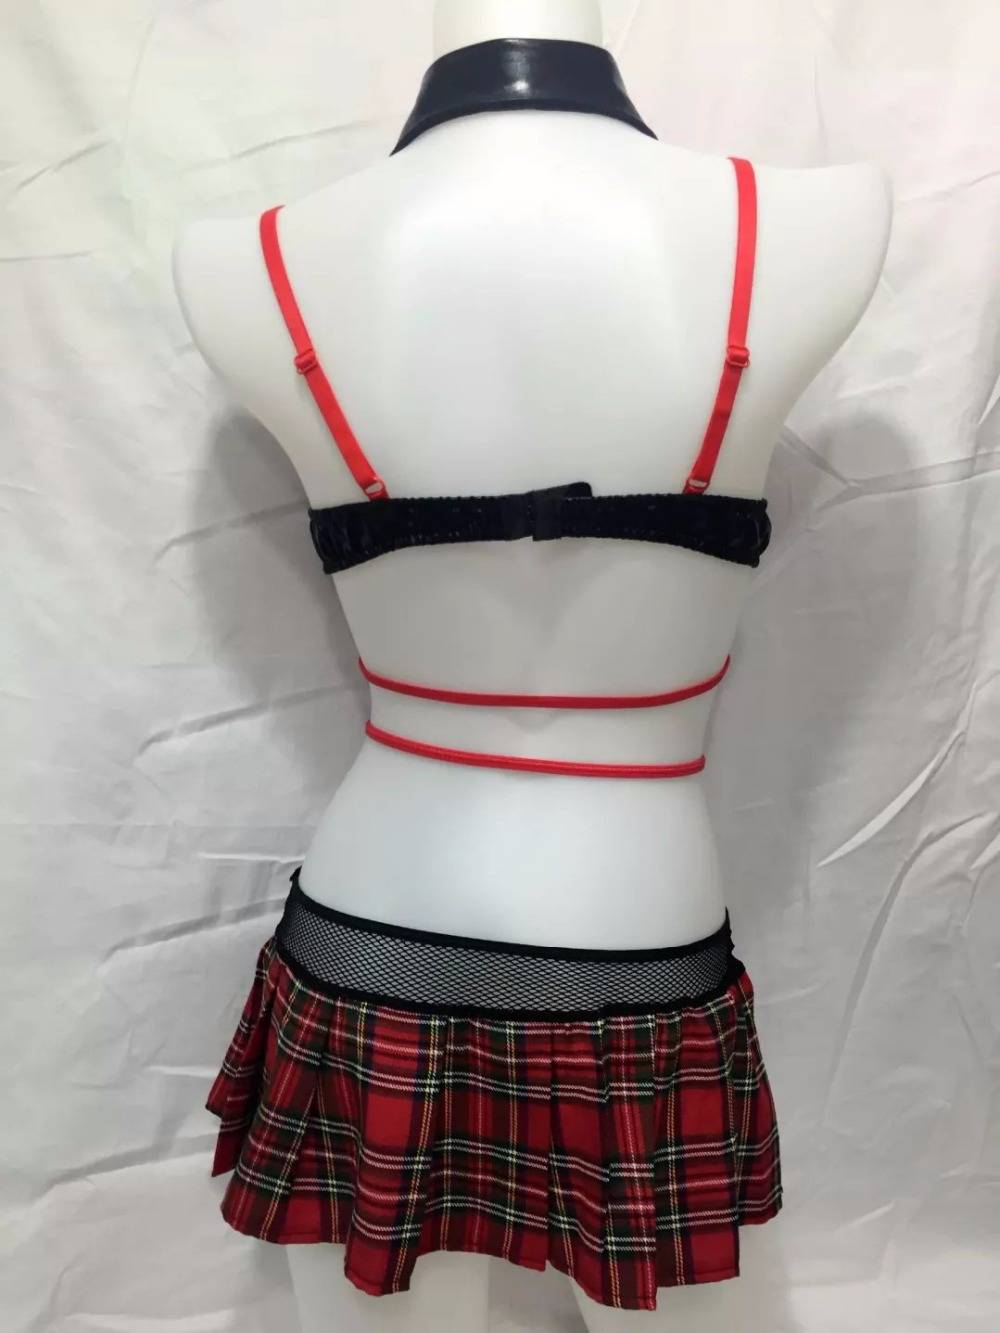 Bad Schoolgirl Set - Kawaii Stop - Adult Games, Bad Schoolgirl, Costumes, Polyester, School Girl, Sexy, Sexy Lingerie, Sexy Products, Skirt, Skirts, Sleeveless, Strappy Top, Tie and Bracelet Set, Women's